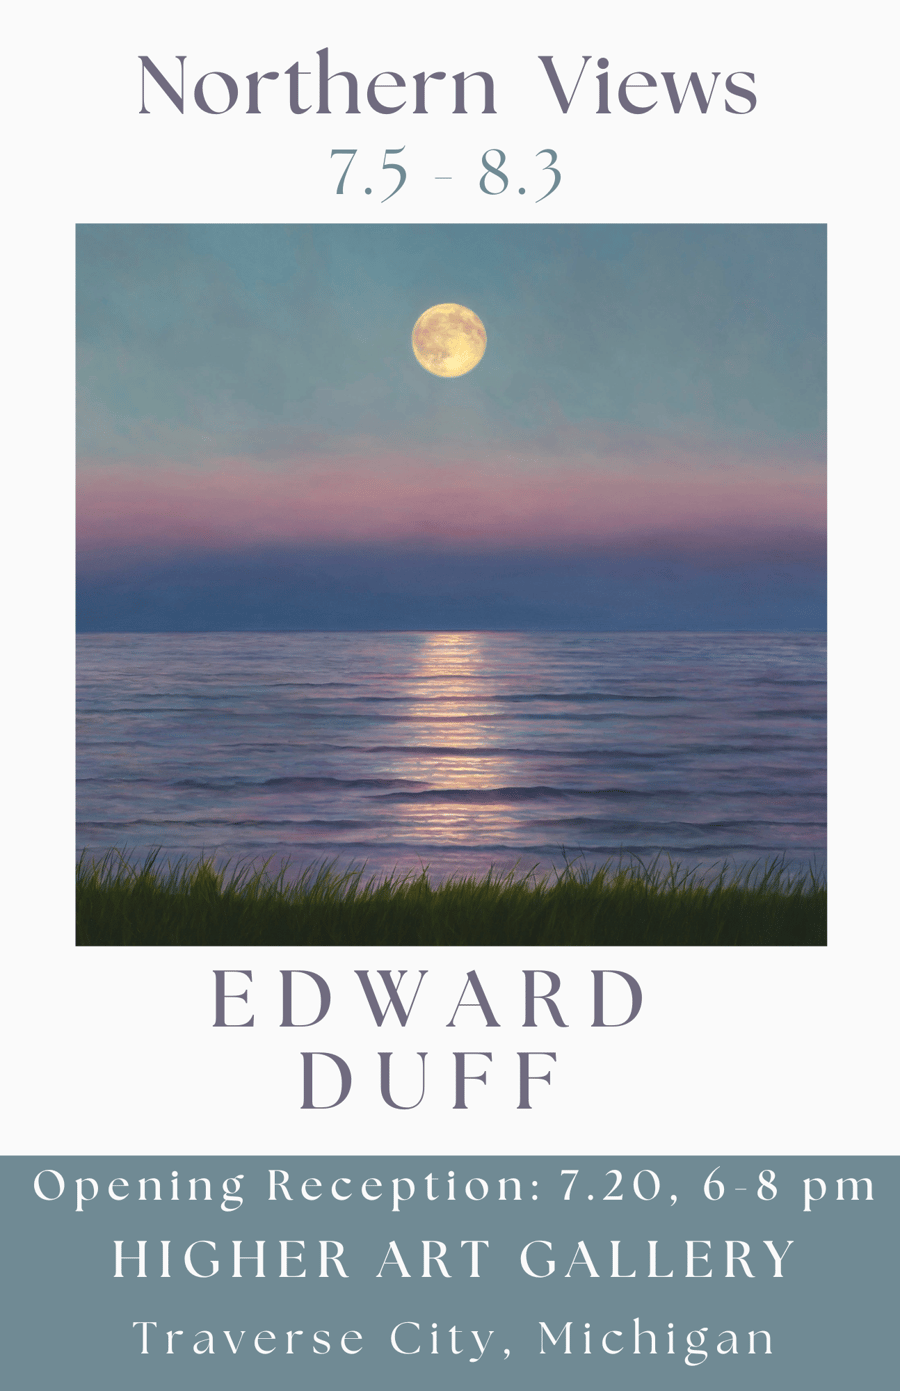 Image of Northern Views - Edward Duff Solo Exhibit